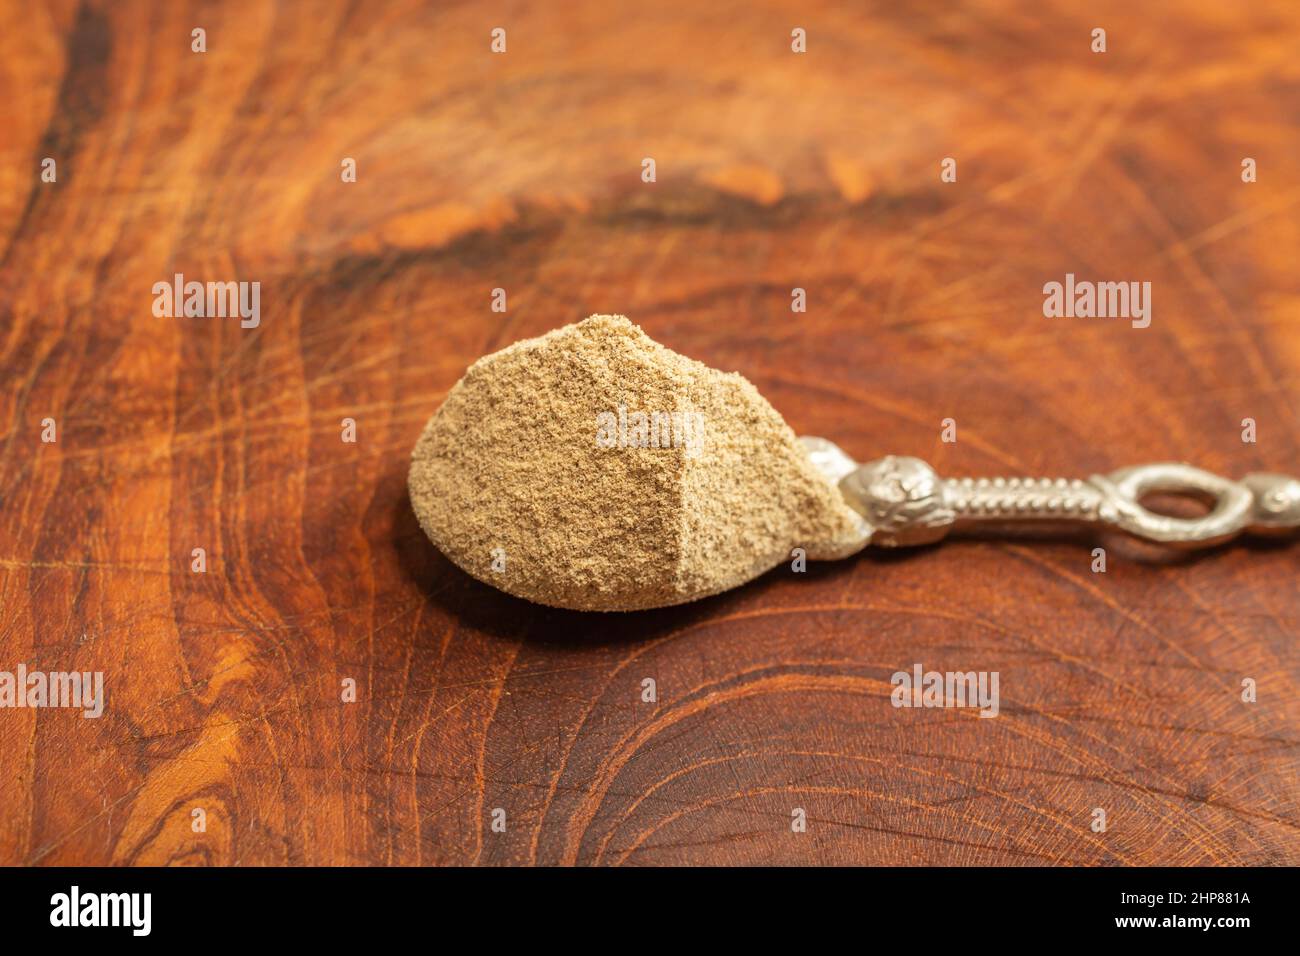 https://c8.alamy.com/comp/2HP881A/silver-teaspoon-full-of-grounded-white-pepper-on-a-wooden-chopper-2HP881A.jpg